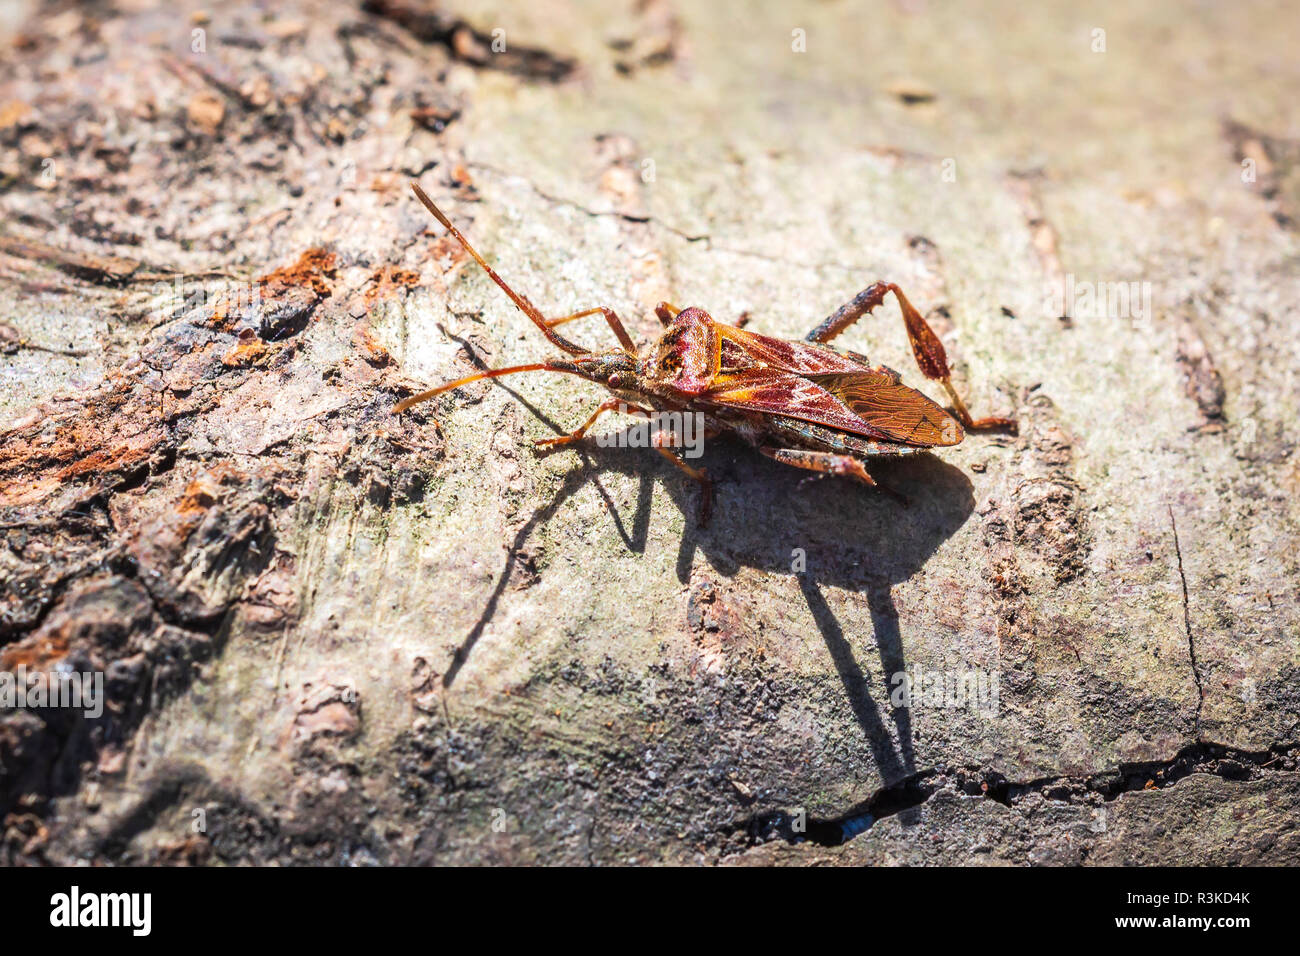 Western conifer seed bug insect, Leptoglossus occidentalis, or WCSB, crawling on wood in bright sunlight Stock Photo